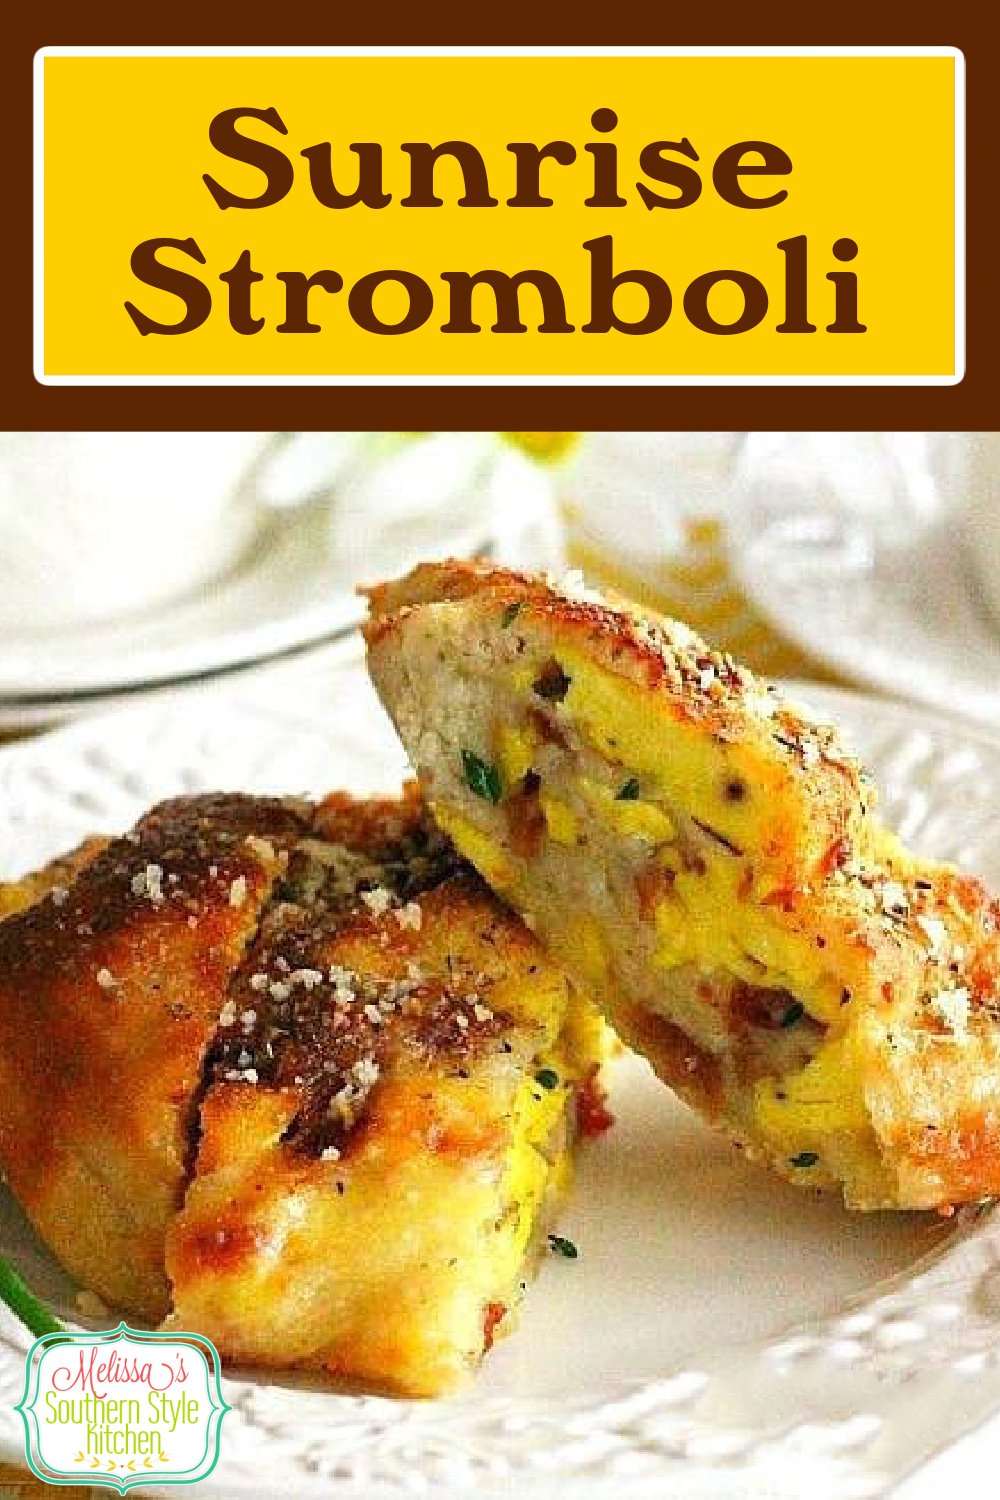 Wrap up everything you love about breakfast in pizza dough and start your day with a Sunrise Stromboli #brewakfast #brunch #eggs #stromboli #strombolirecipes #breakfaststromboli #southernrecipes #pizzadough #strombolis #baconandeggs via @melissasssk